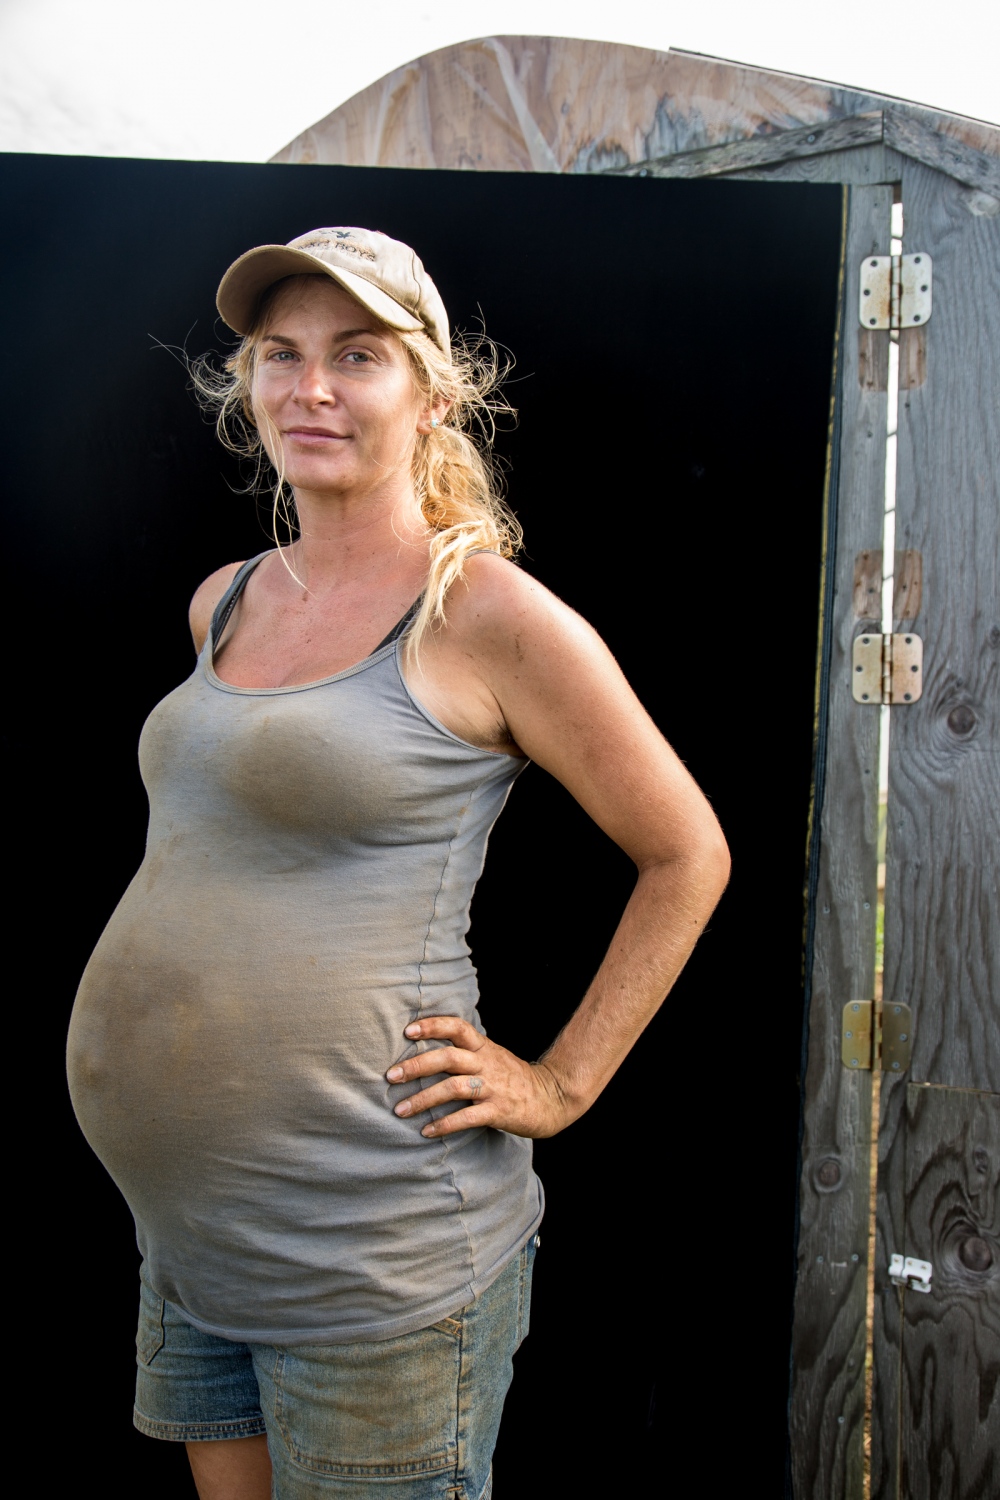 Oh, Farmer - Farmer Melissa Mapes, 8 months pregnant working on an...